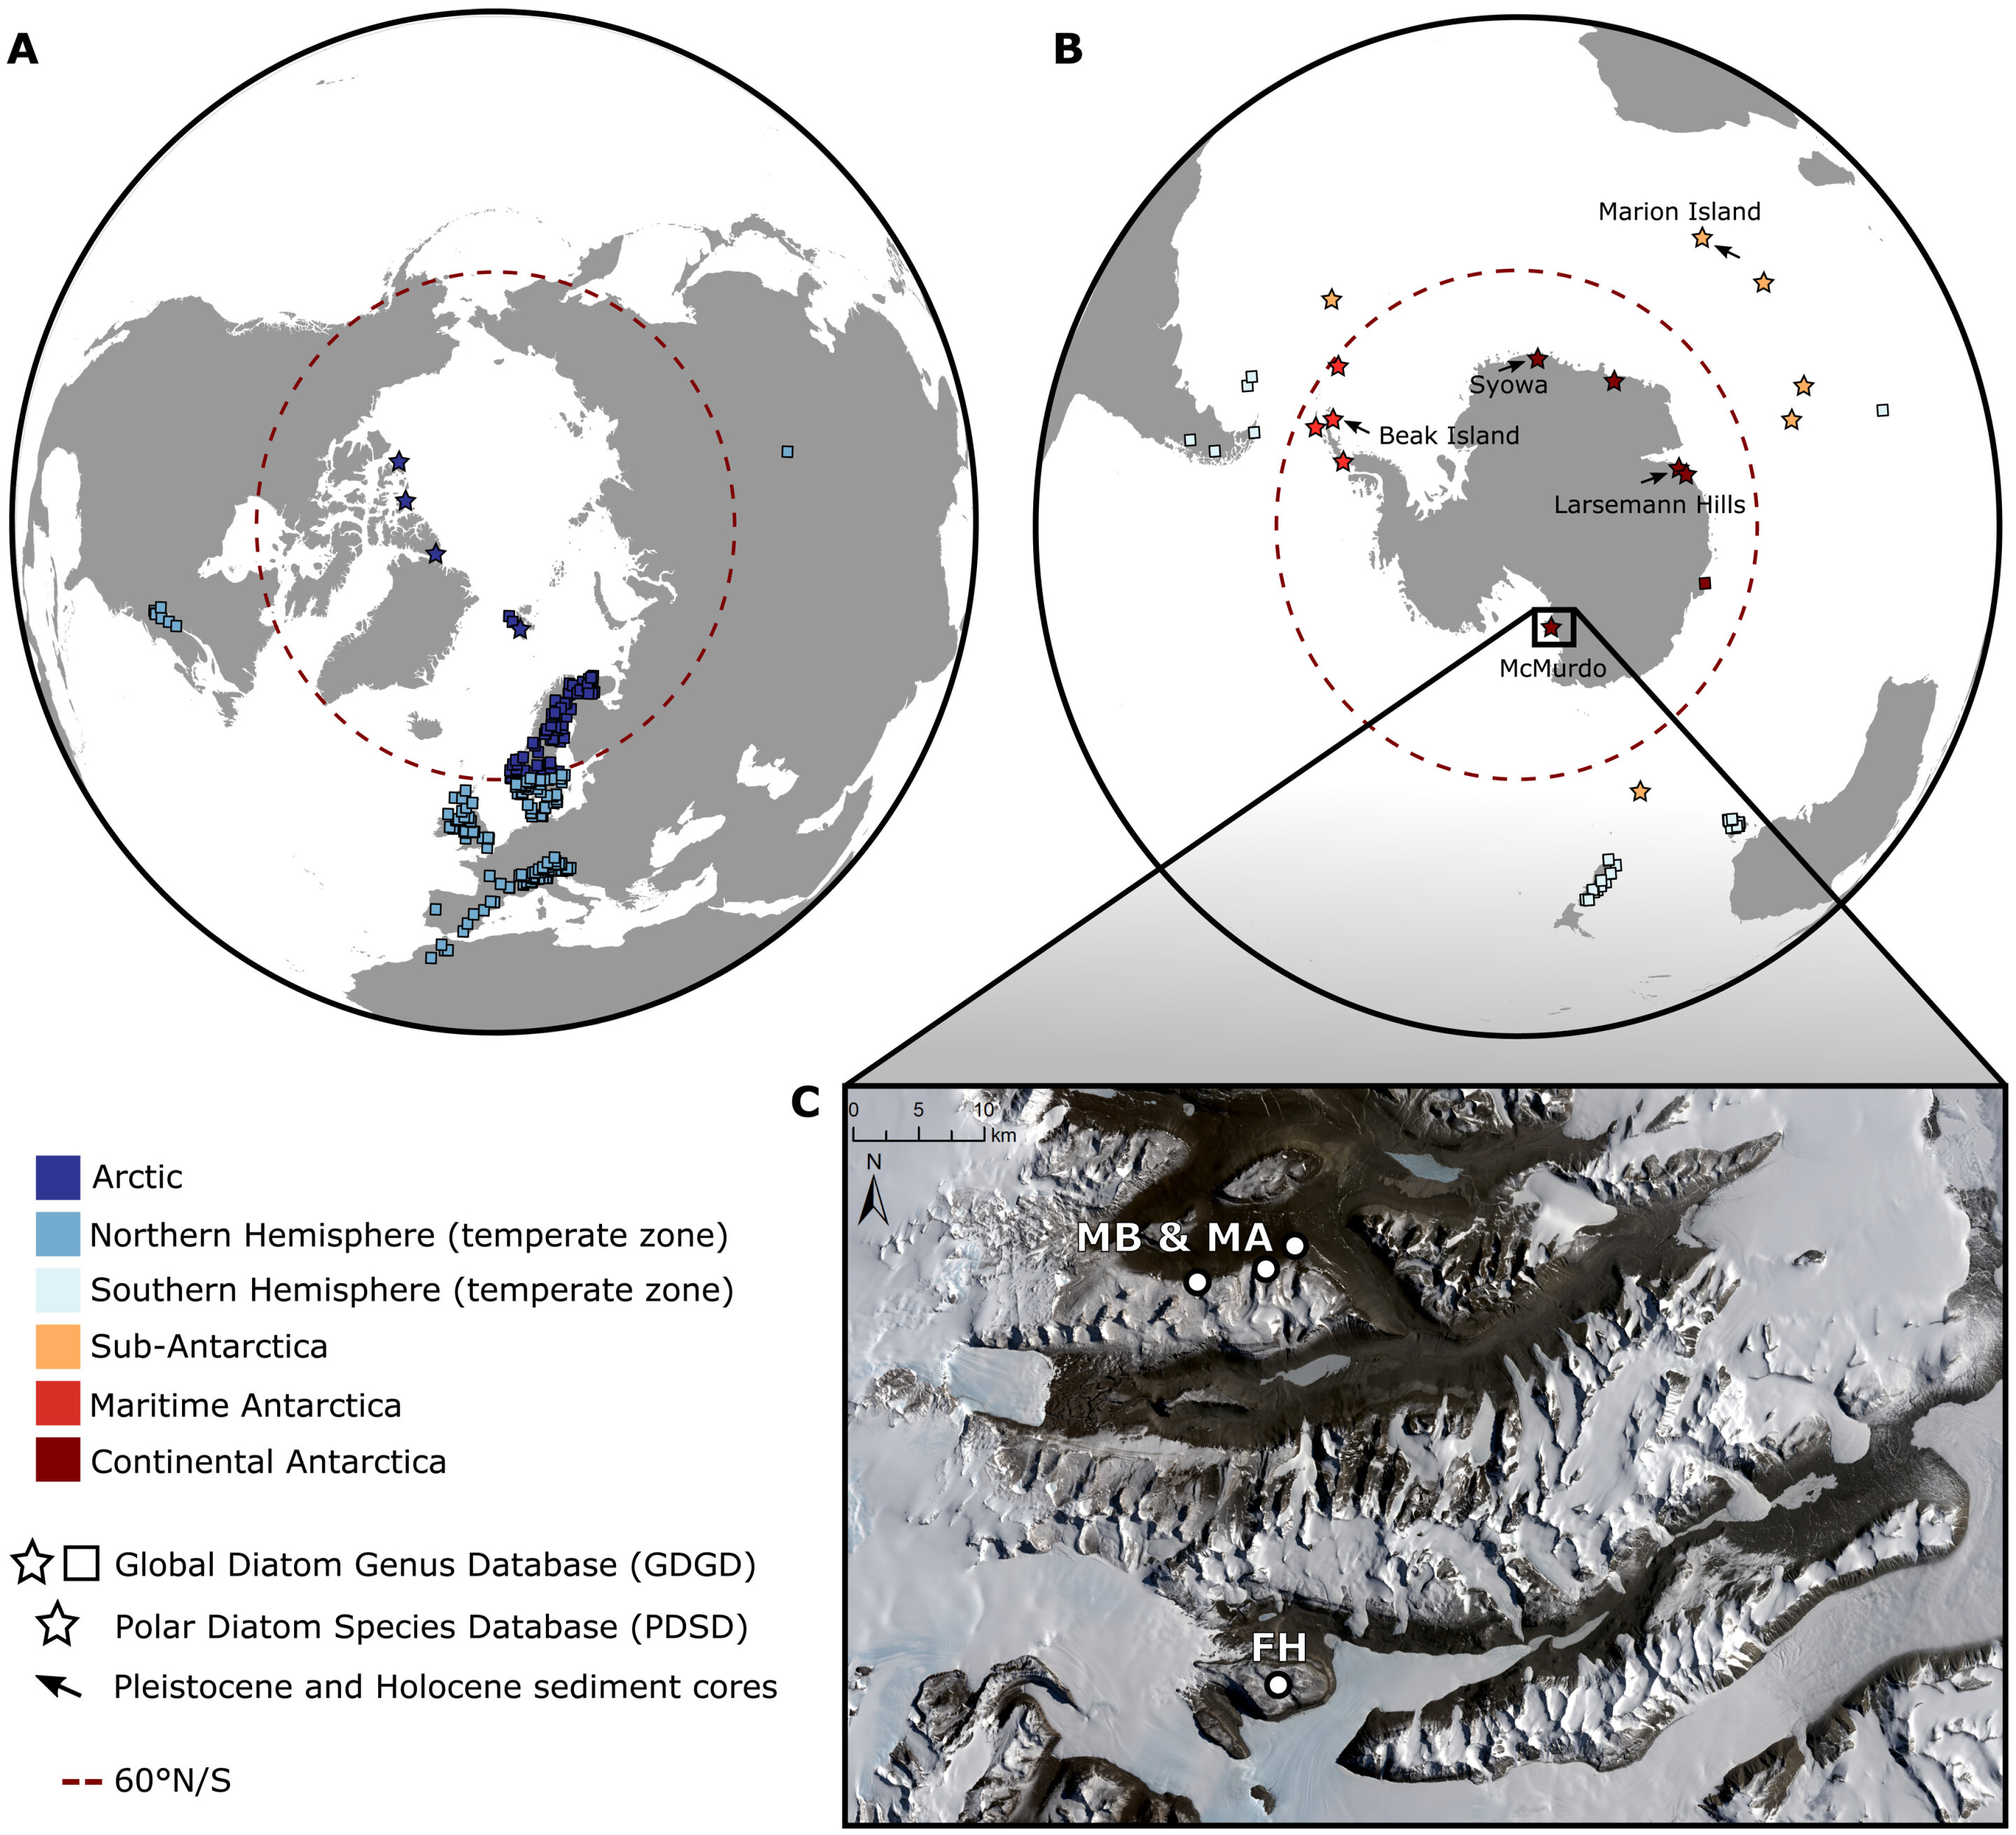 Microorganisms are sensitive to large-scale climate change in Antarctica